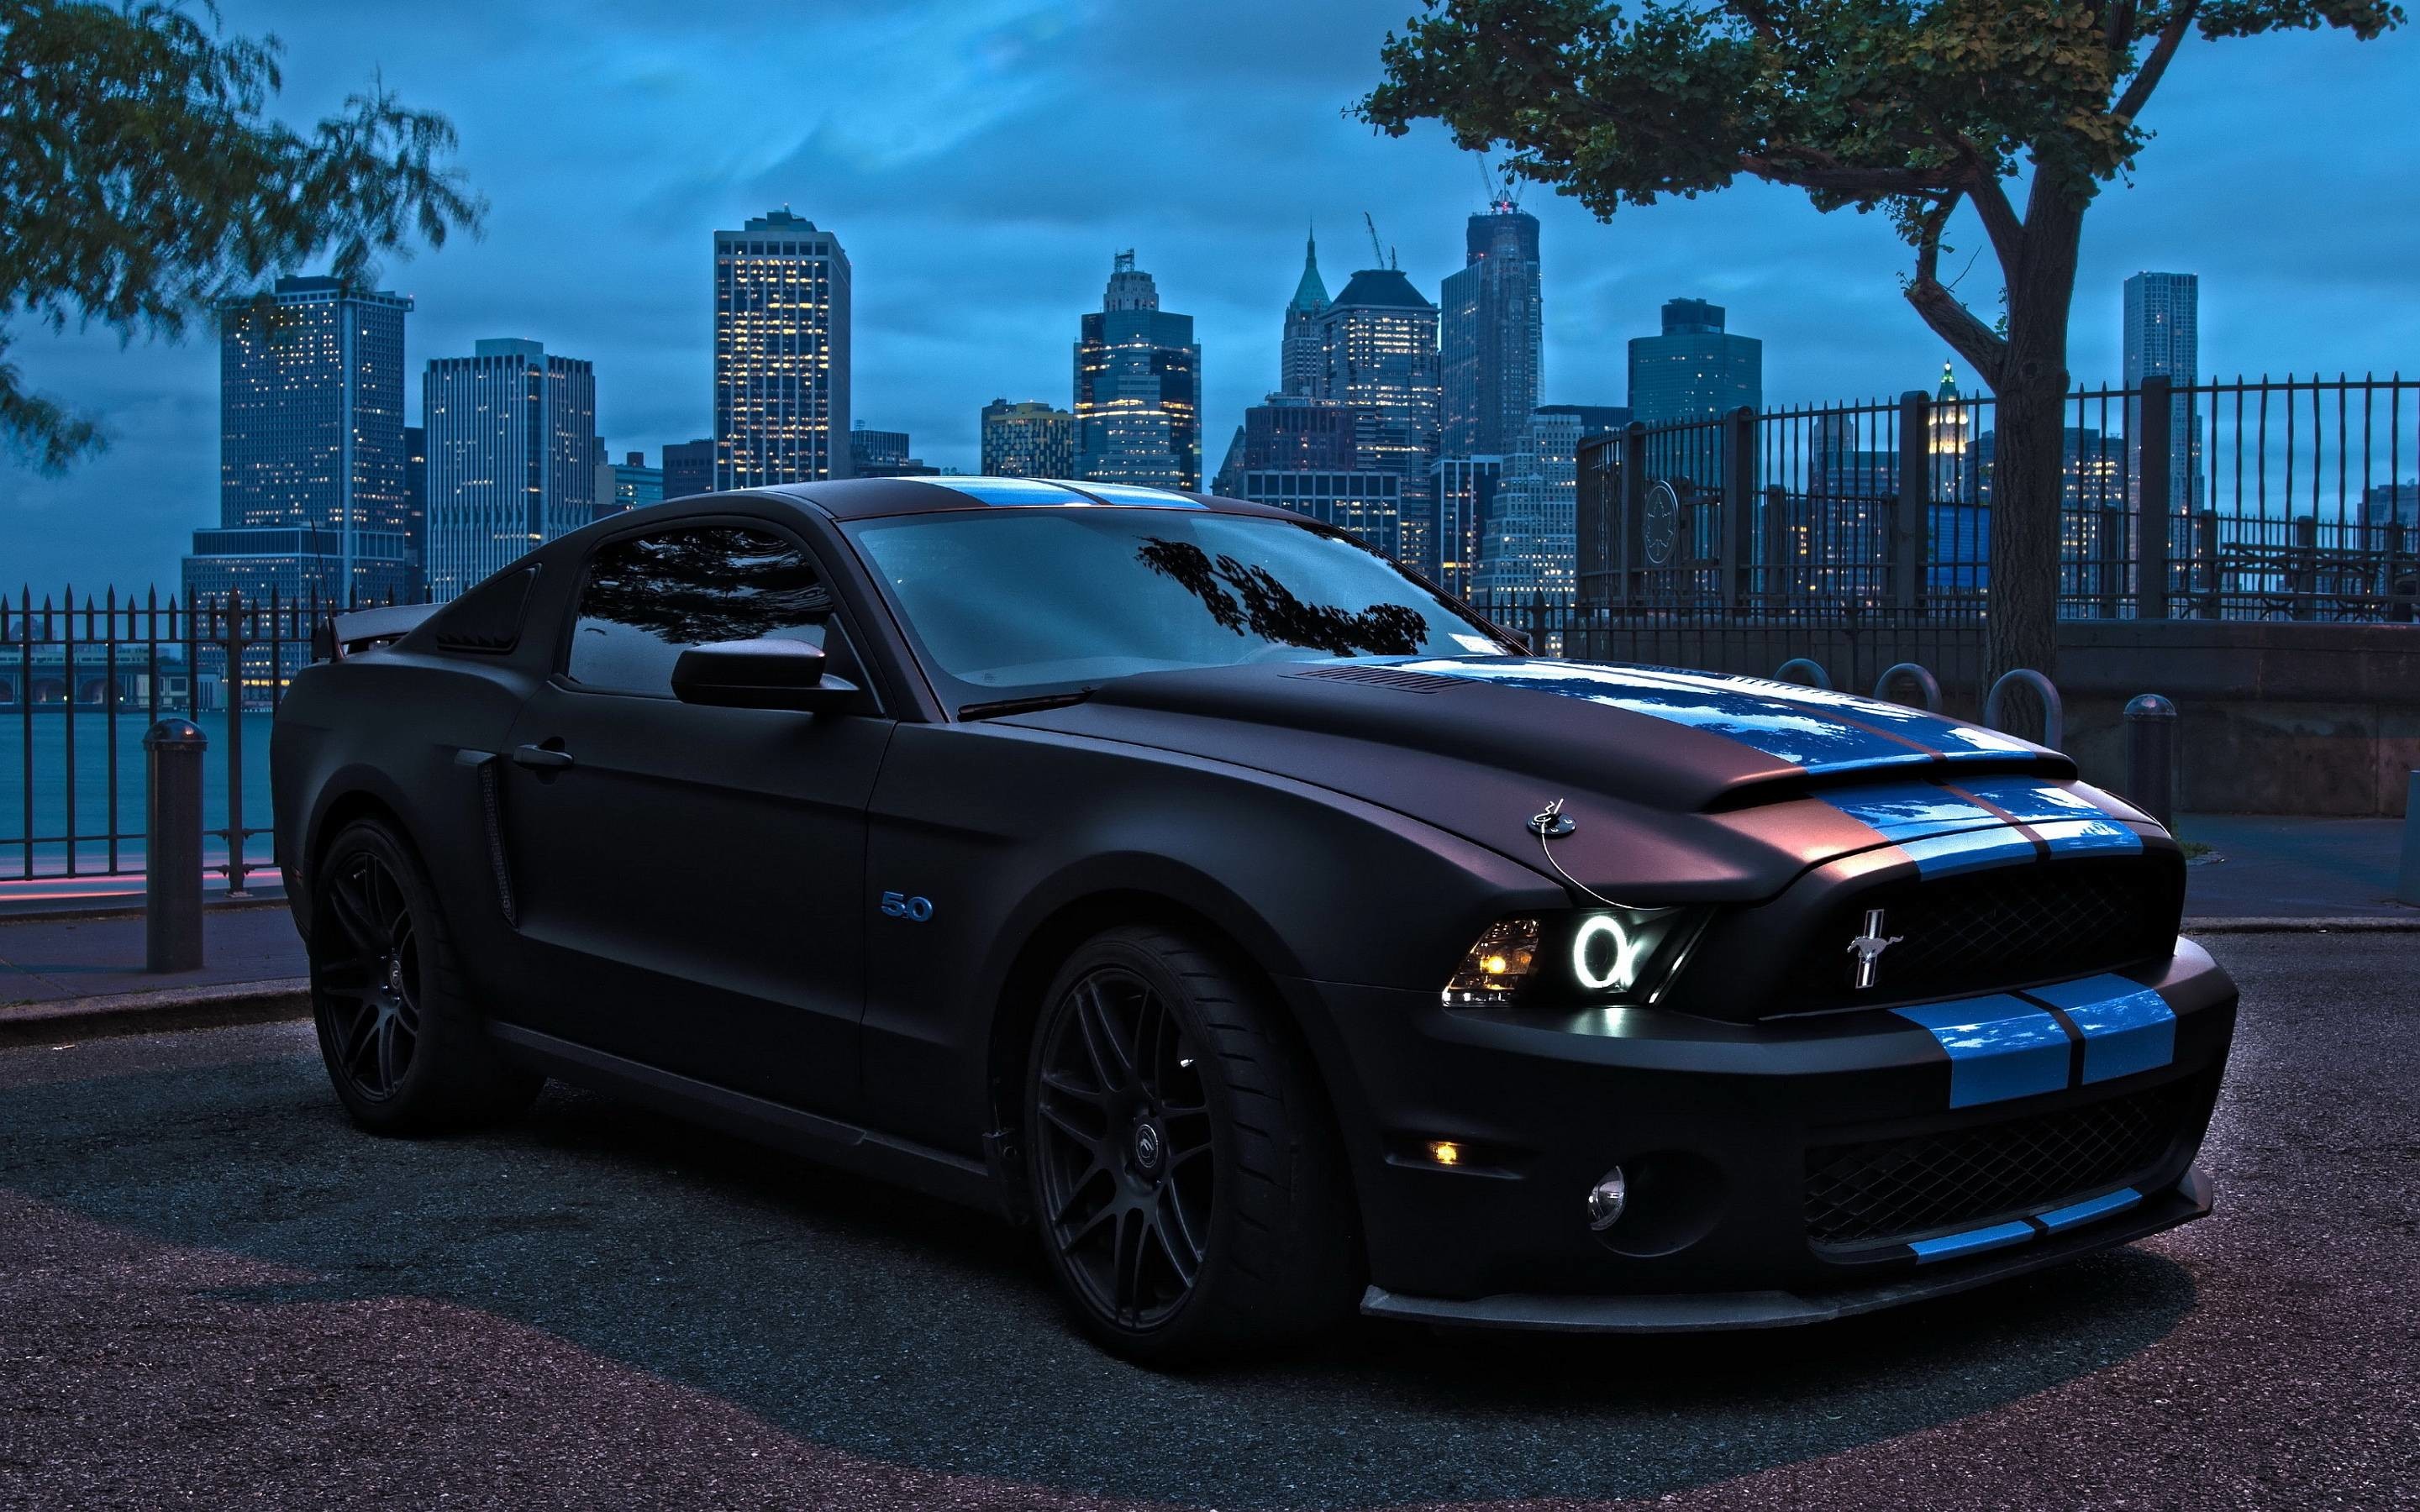 2880x1800 1920x1080 This Ford Dealership Sells 700-Horsepower Mustang GTs for $39,995  - The Drive